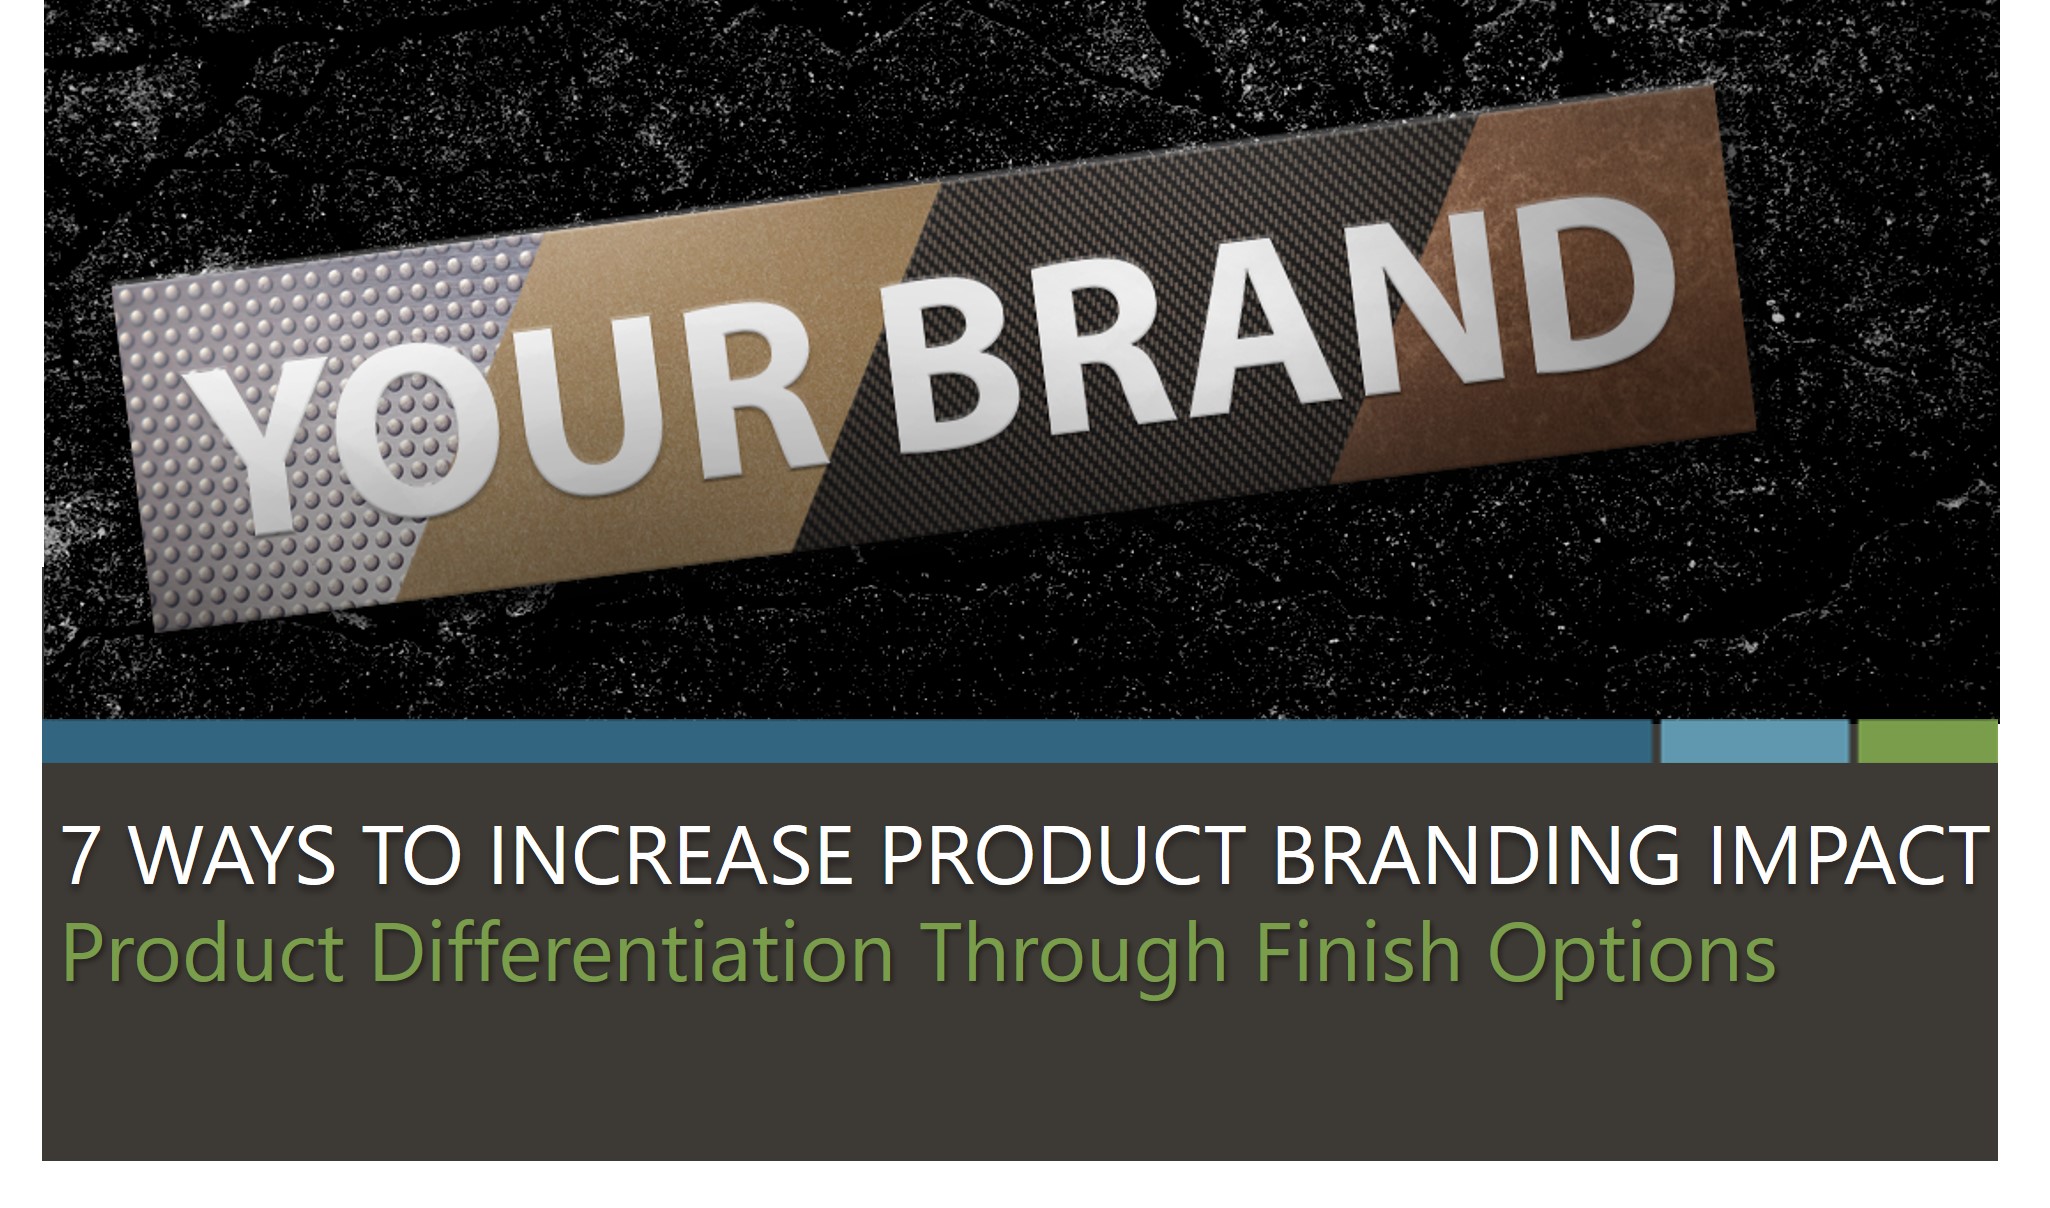 7 Ways to Increase Product Branding Impact eBook | Product Differentiation Through Finish Options